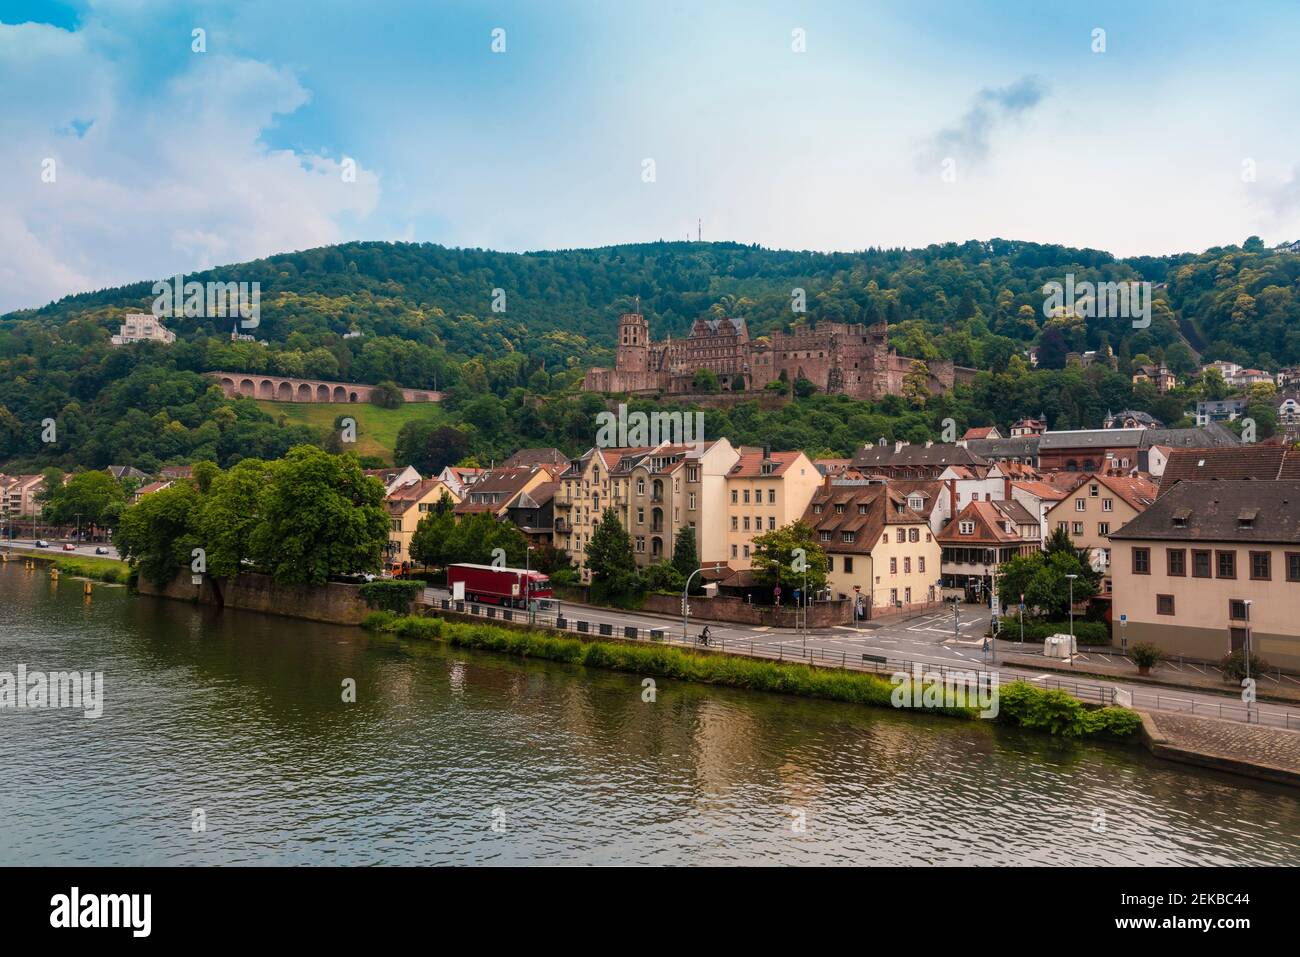 Germany, Baden-Wurttemberg, Heidelberg, Bank of Neckar with old town buildings and Heidelberg Castle in background Stock Photo